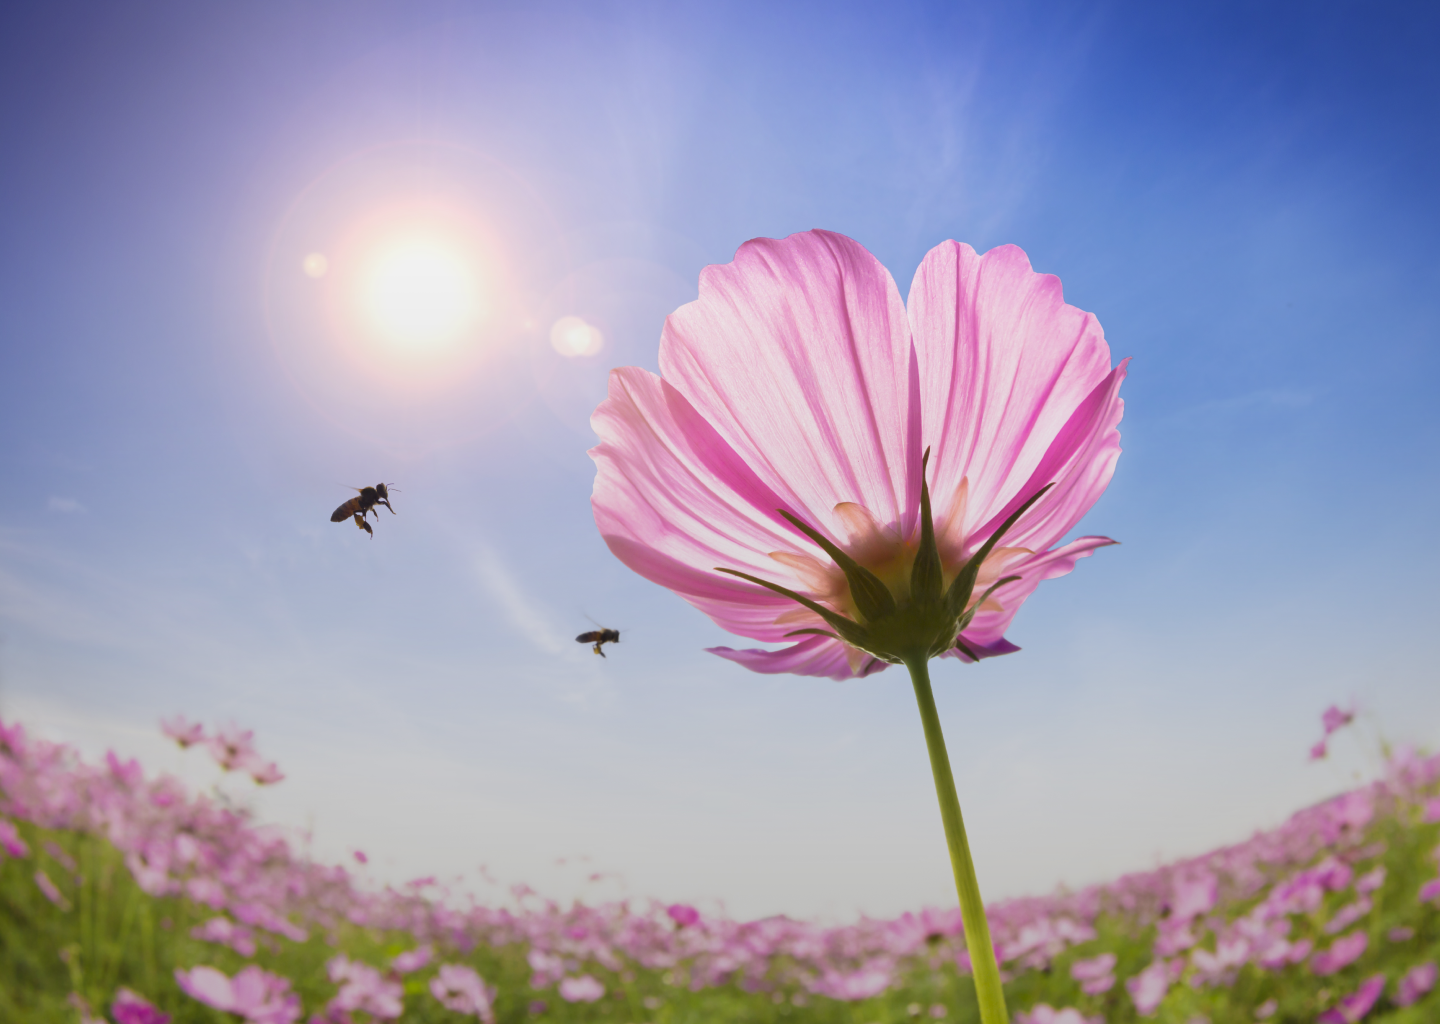 A macro photo of a pink flower and 2 bees in front of a blue sky